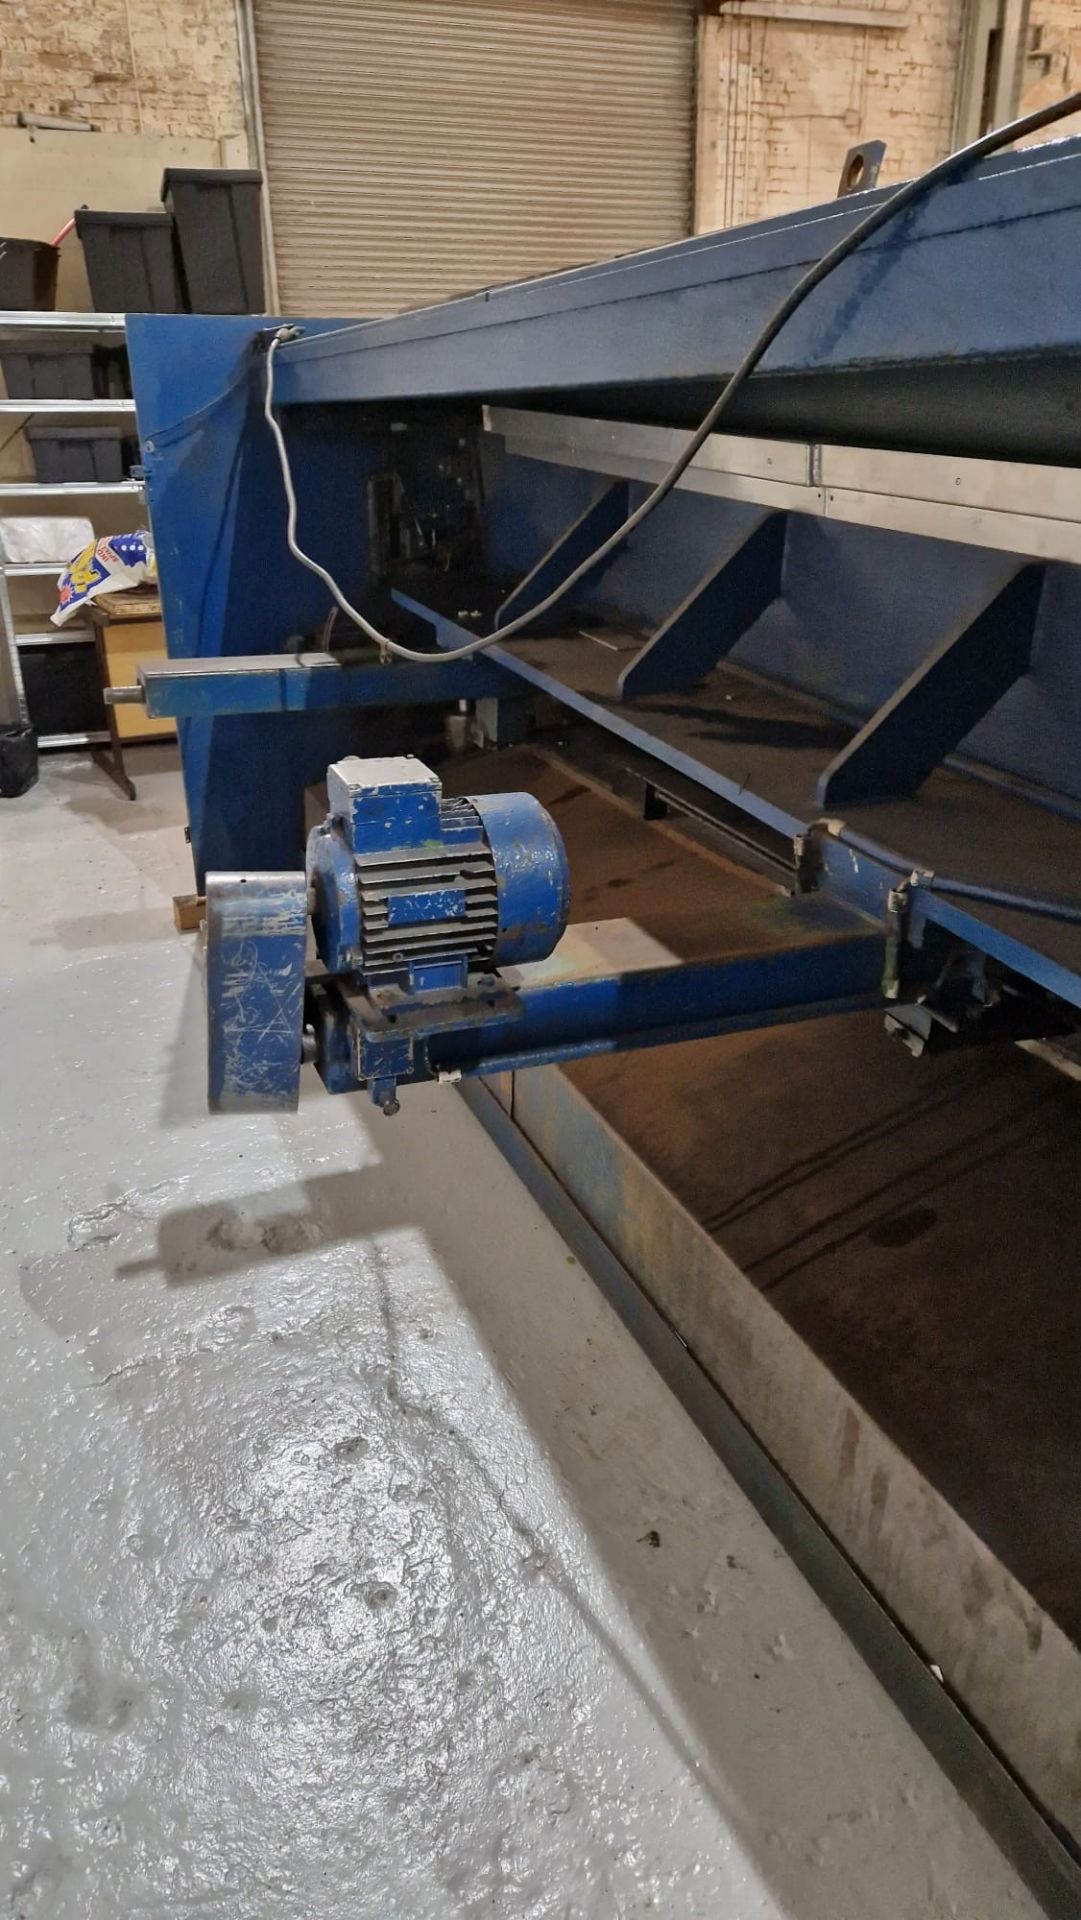 Kingsland 3000 x 6mm Hydraulic Guillotine - Image 5 of 5